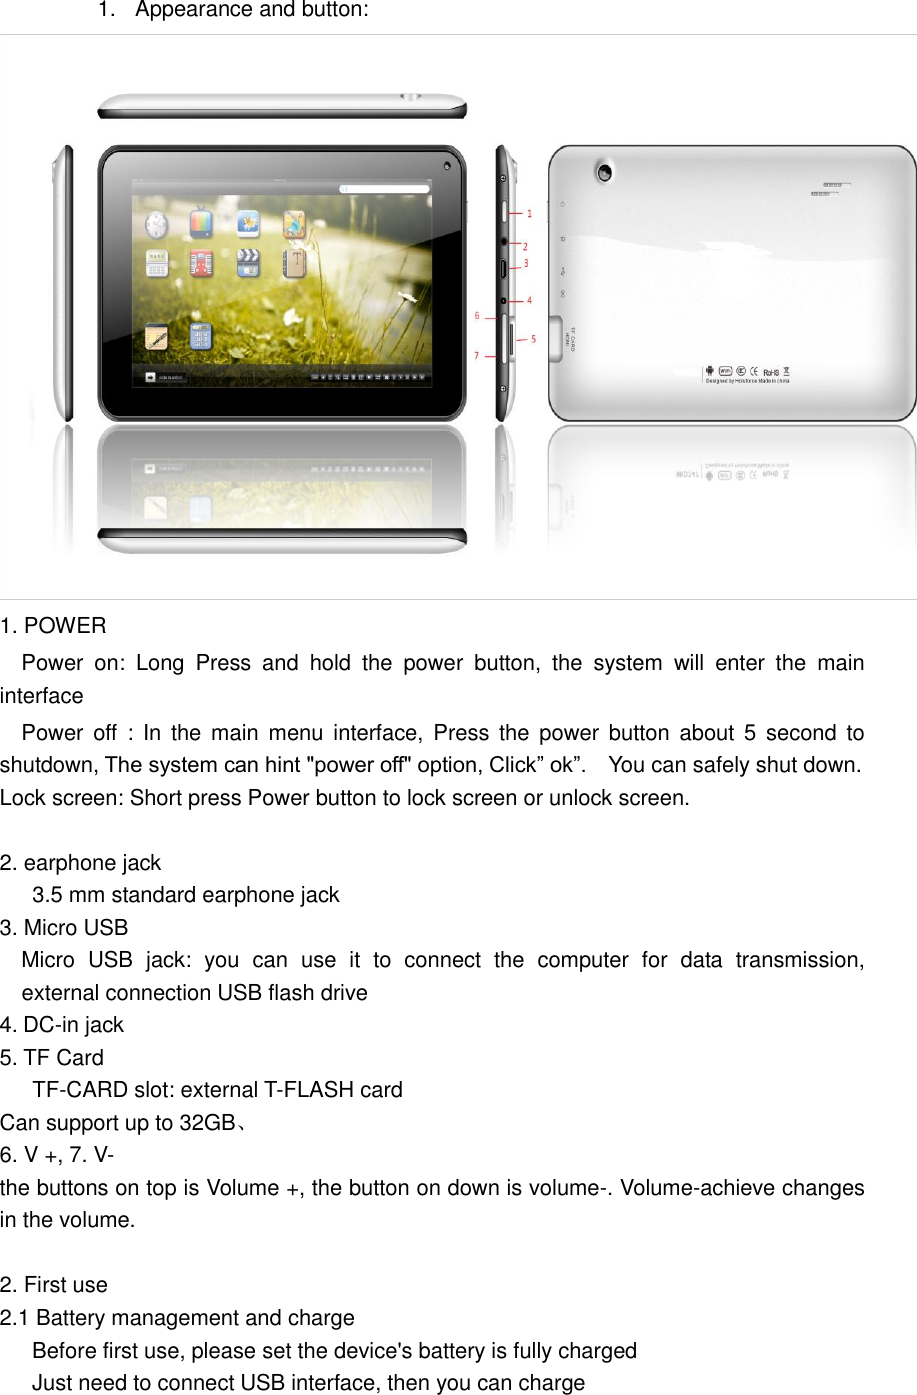 1.  Appearance and button:  1. POWER   Power  on:  Long  Press  and  hold  the  power  button,  the  system  will  enter  the  main interface   Power off  :  In the  main menu  interface,  Press  the  power button  about  5 second  to shutdown, The system can hint &quot;power off&quot; option, Click” ok”.    You can safely shut down. Lock screen: Short press Power button to lock screen or unlock screen.  2. earphone jack 3.5 mm standard earphone jack 3. Micro USB   Micro  USB  jack:  you  can  use  it  to  connect  the  computer  for  data  transmission,   external connection USB flash drive 4. DC-in jack 5. TF Card TF-CARD slot: external T-FLASH card Can support up to 32GB、 6. V +, 7. V- the buttons on top is Volume +, the button on down is volume-. Volume-achieve changes in the volume.            2. First use 2.1 Battery management and charge       Before first use, please set the device&apos;s battery is fully charged       Just need to connect USB interface, then you can charge 